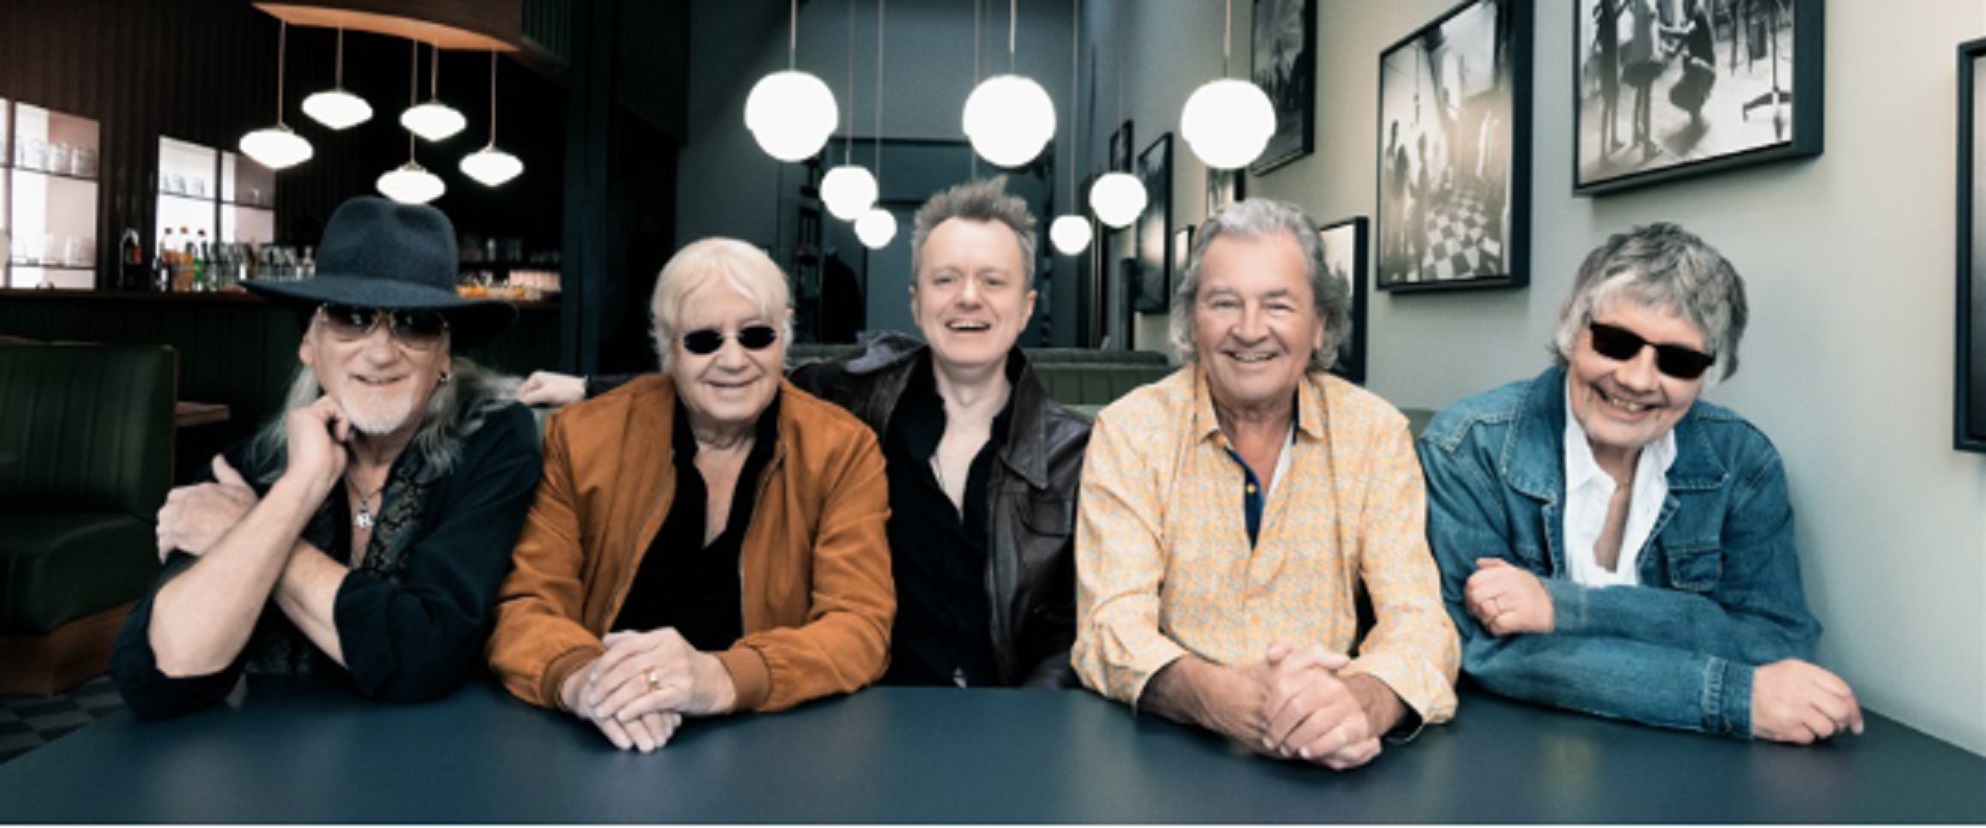 DEEP PURPLE RELEASES NEW SONG + VIDEO 'LAZY SOD' OUT NOW